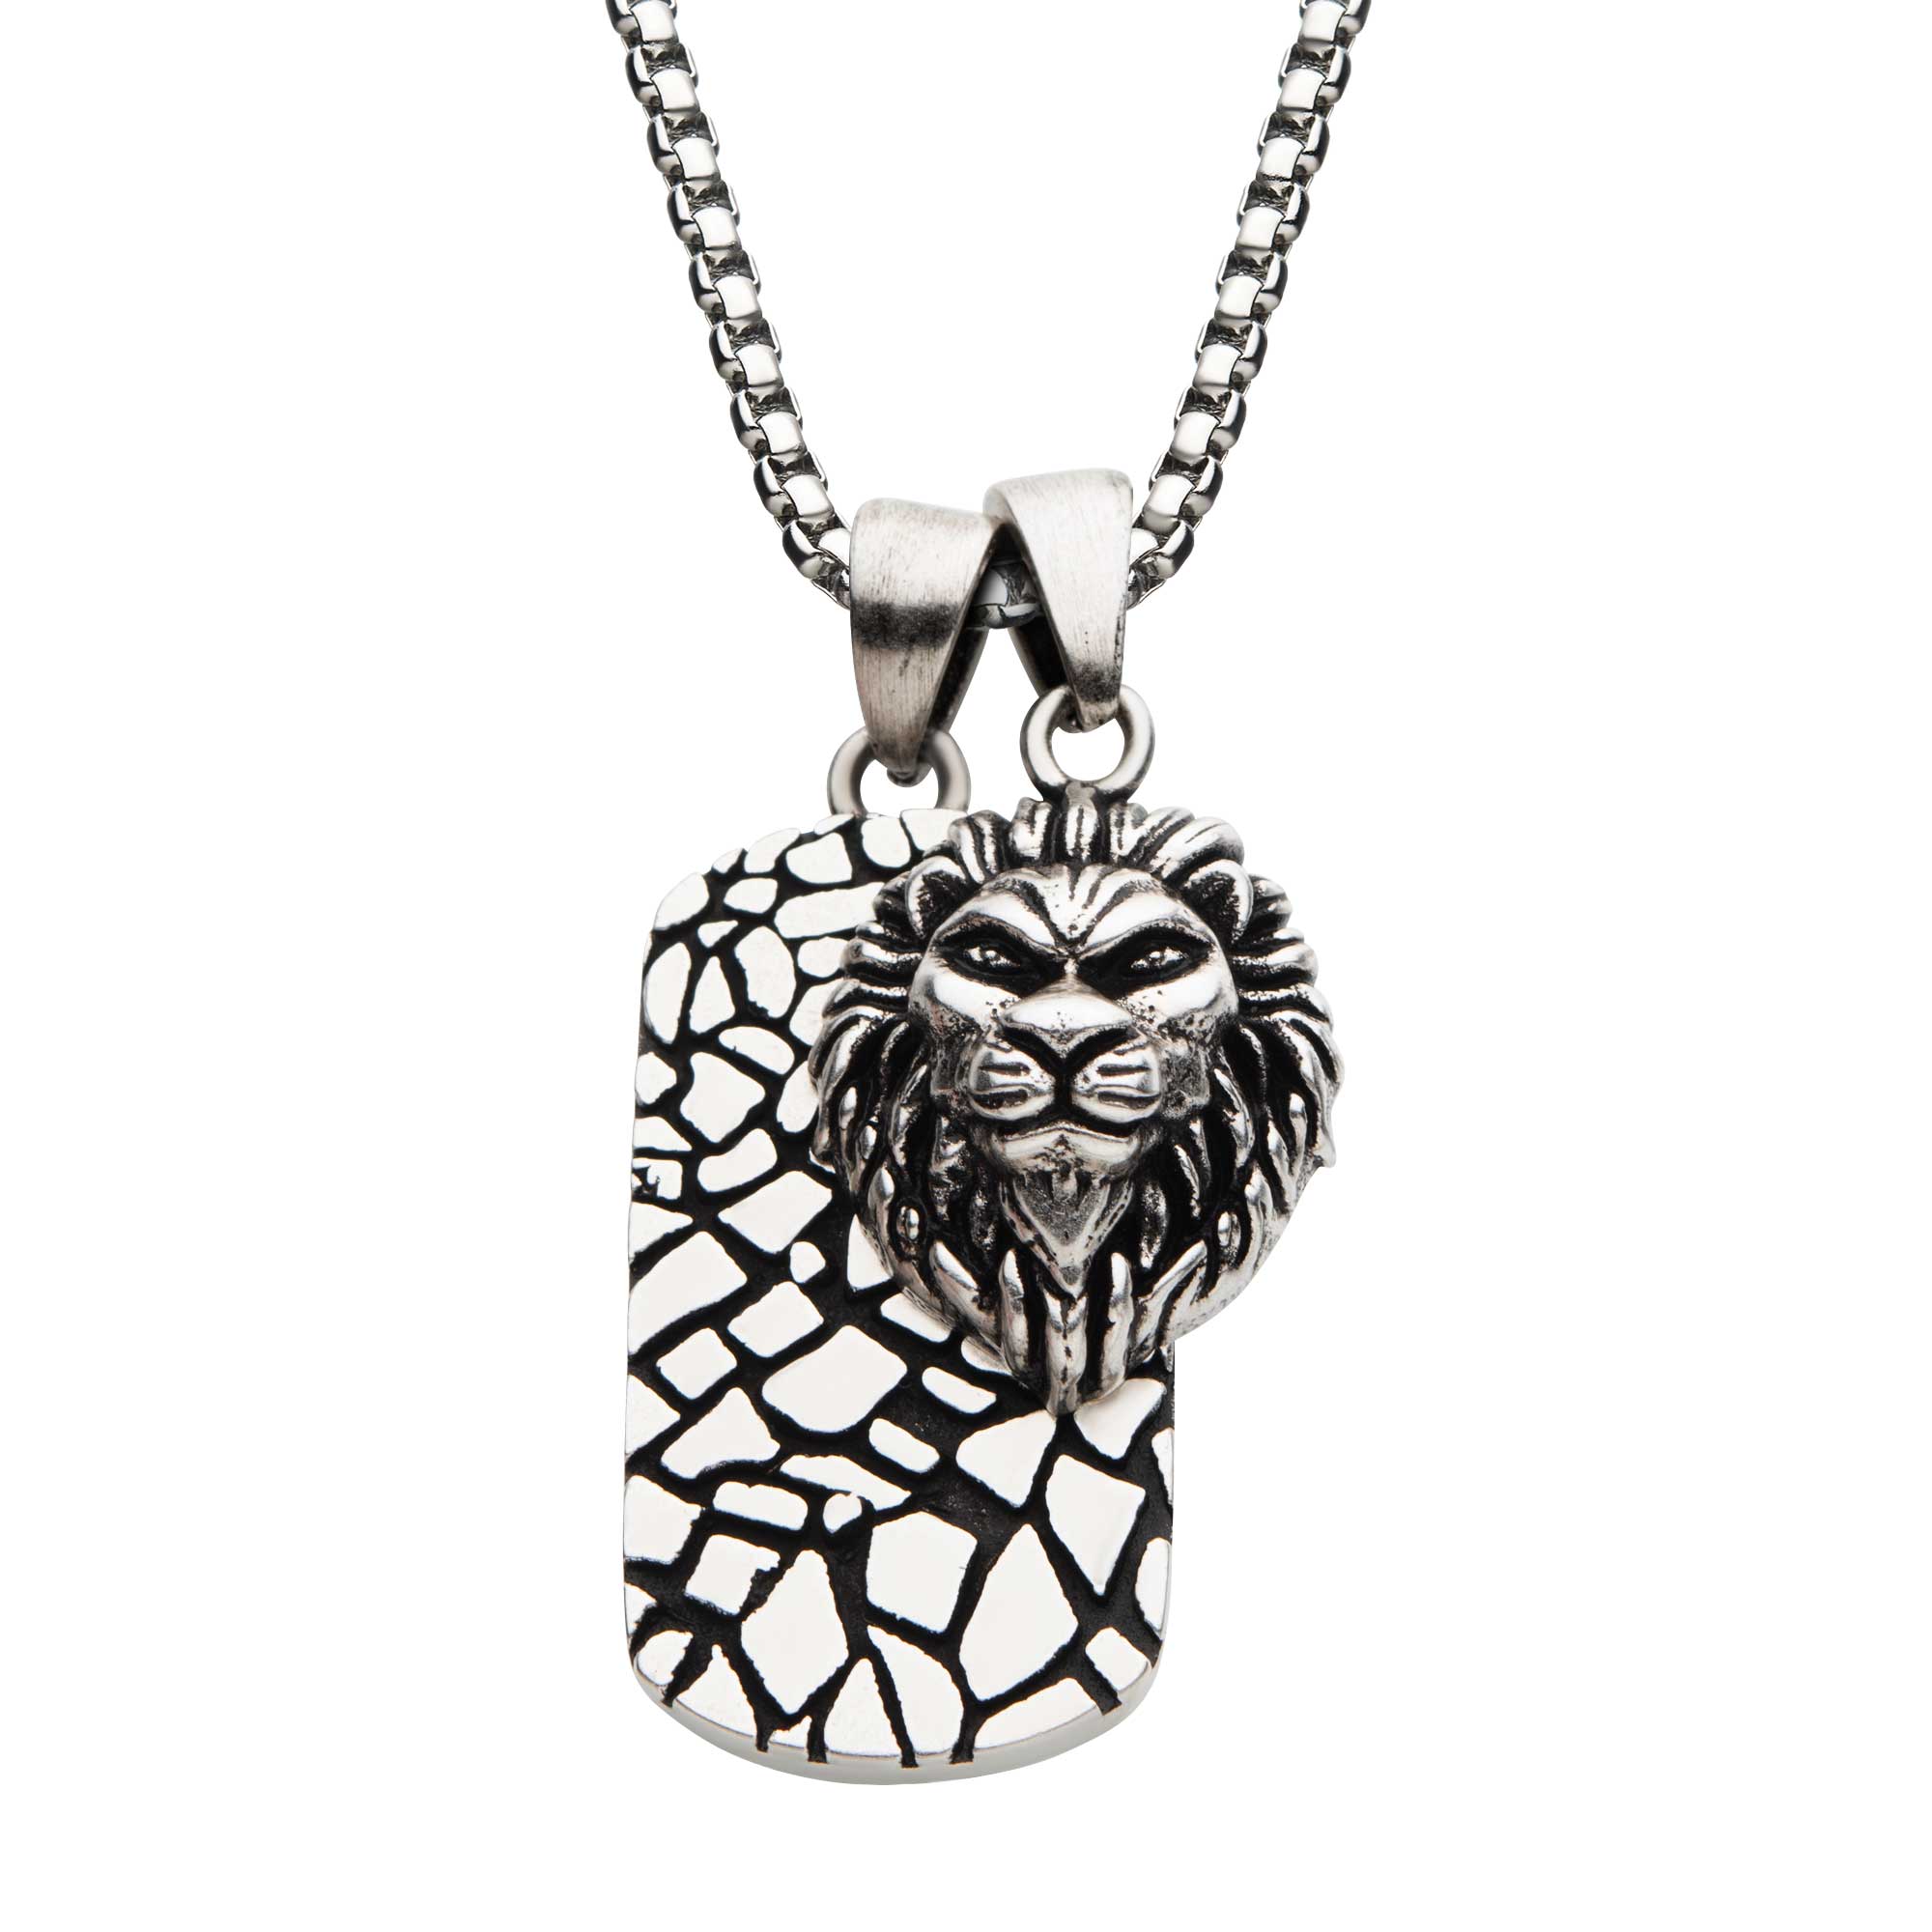 Stainless Steel with 3D Lion Head Dog Tag Pendant, with Antique Silver Plated Chain Carroll / Ochs Jewelers Monroe, MI